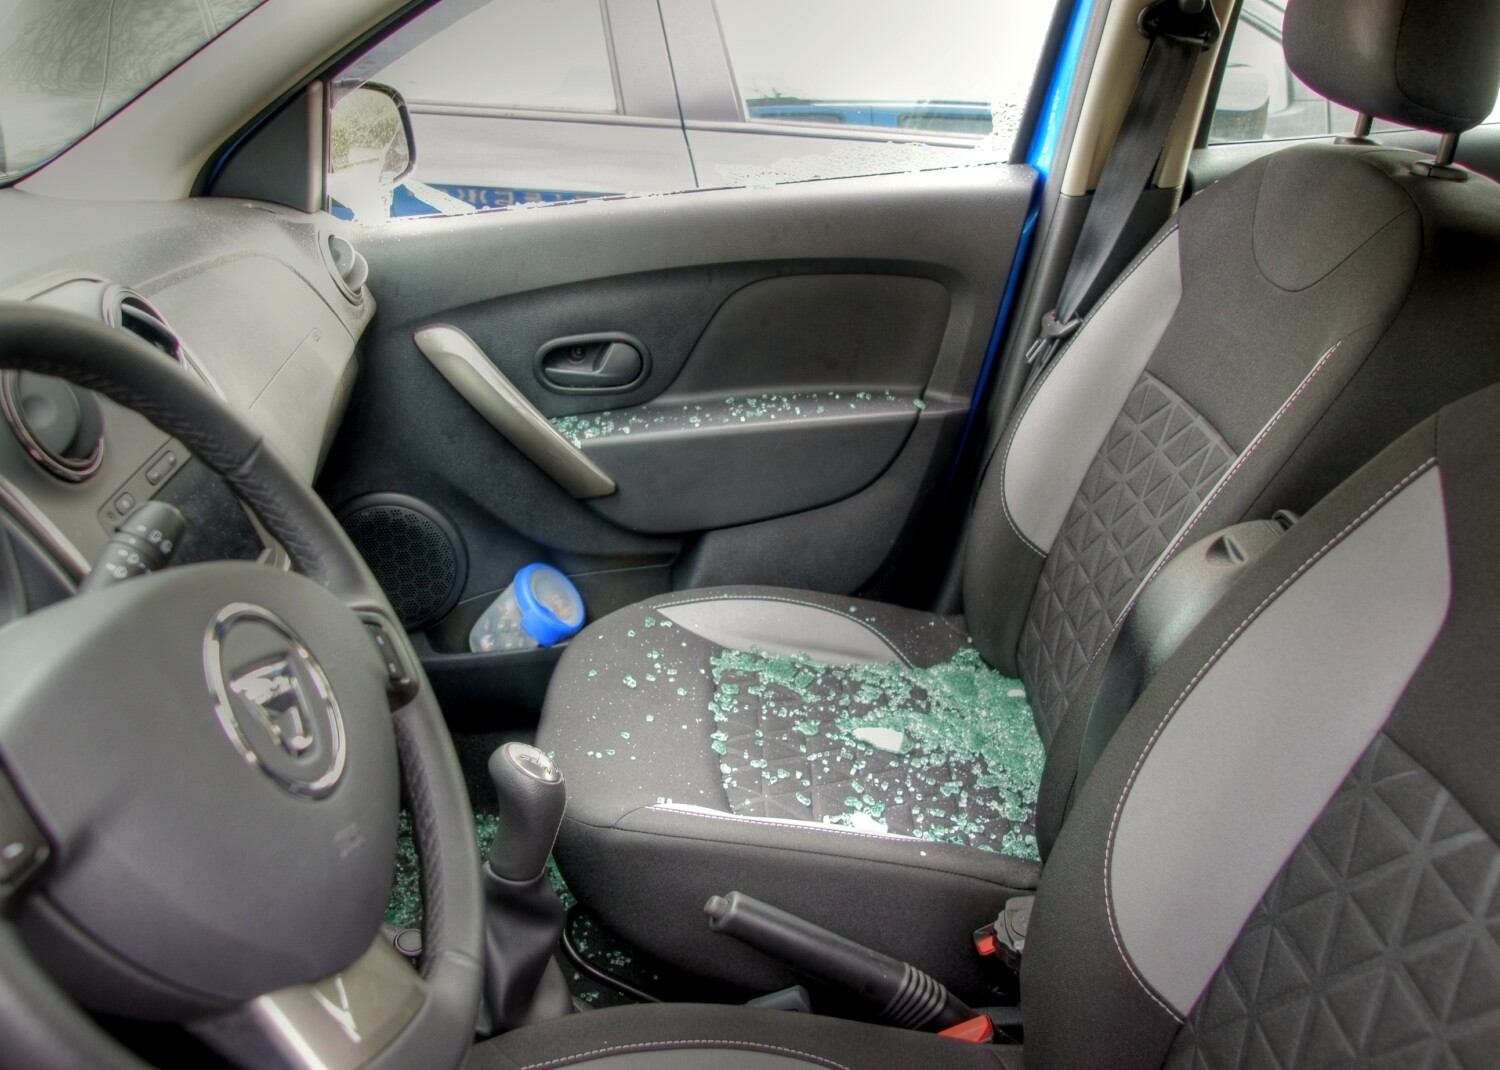 stock-photo-thiefs-have-broken-a-car-window-to-steel-items-inside-and-the-glass-is-spread-all-over-the-car-230798356